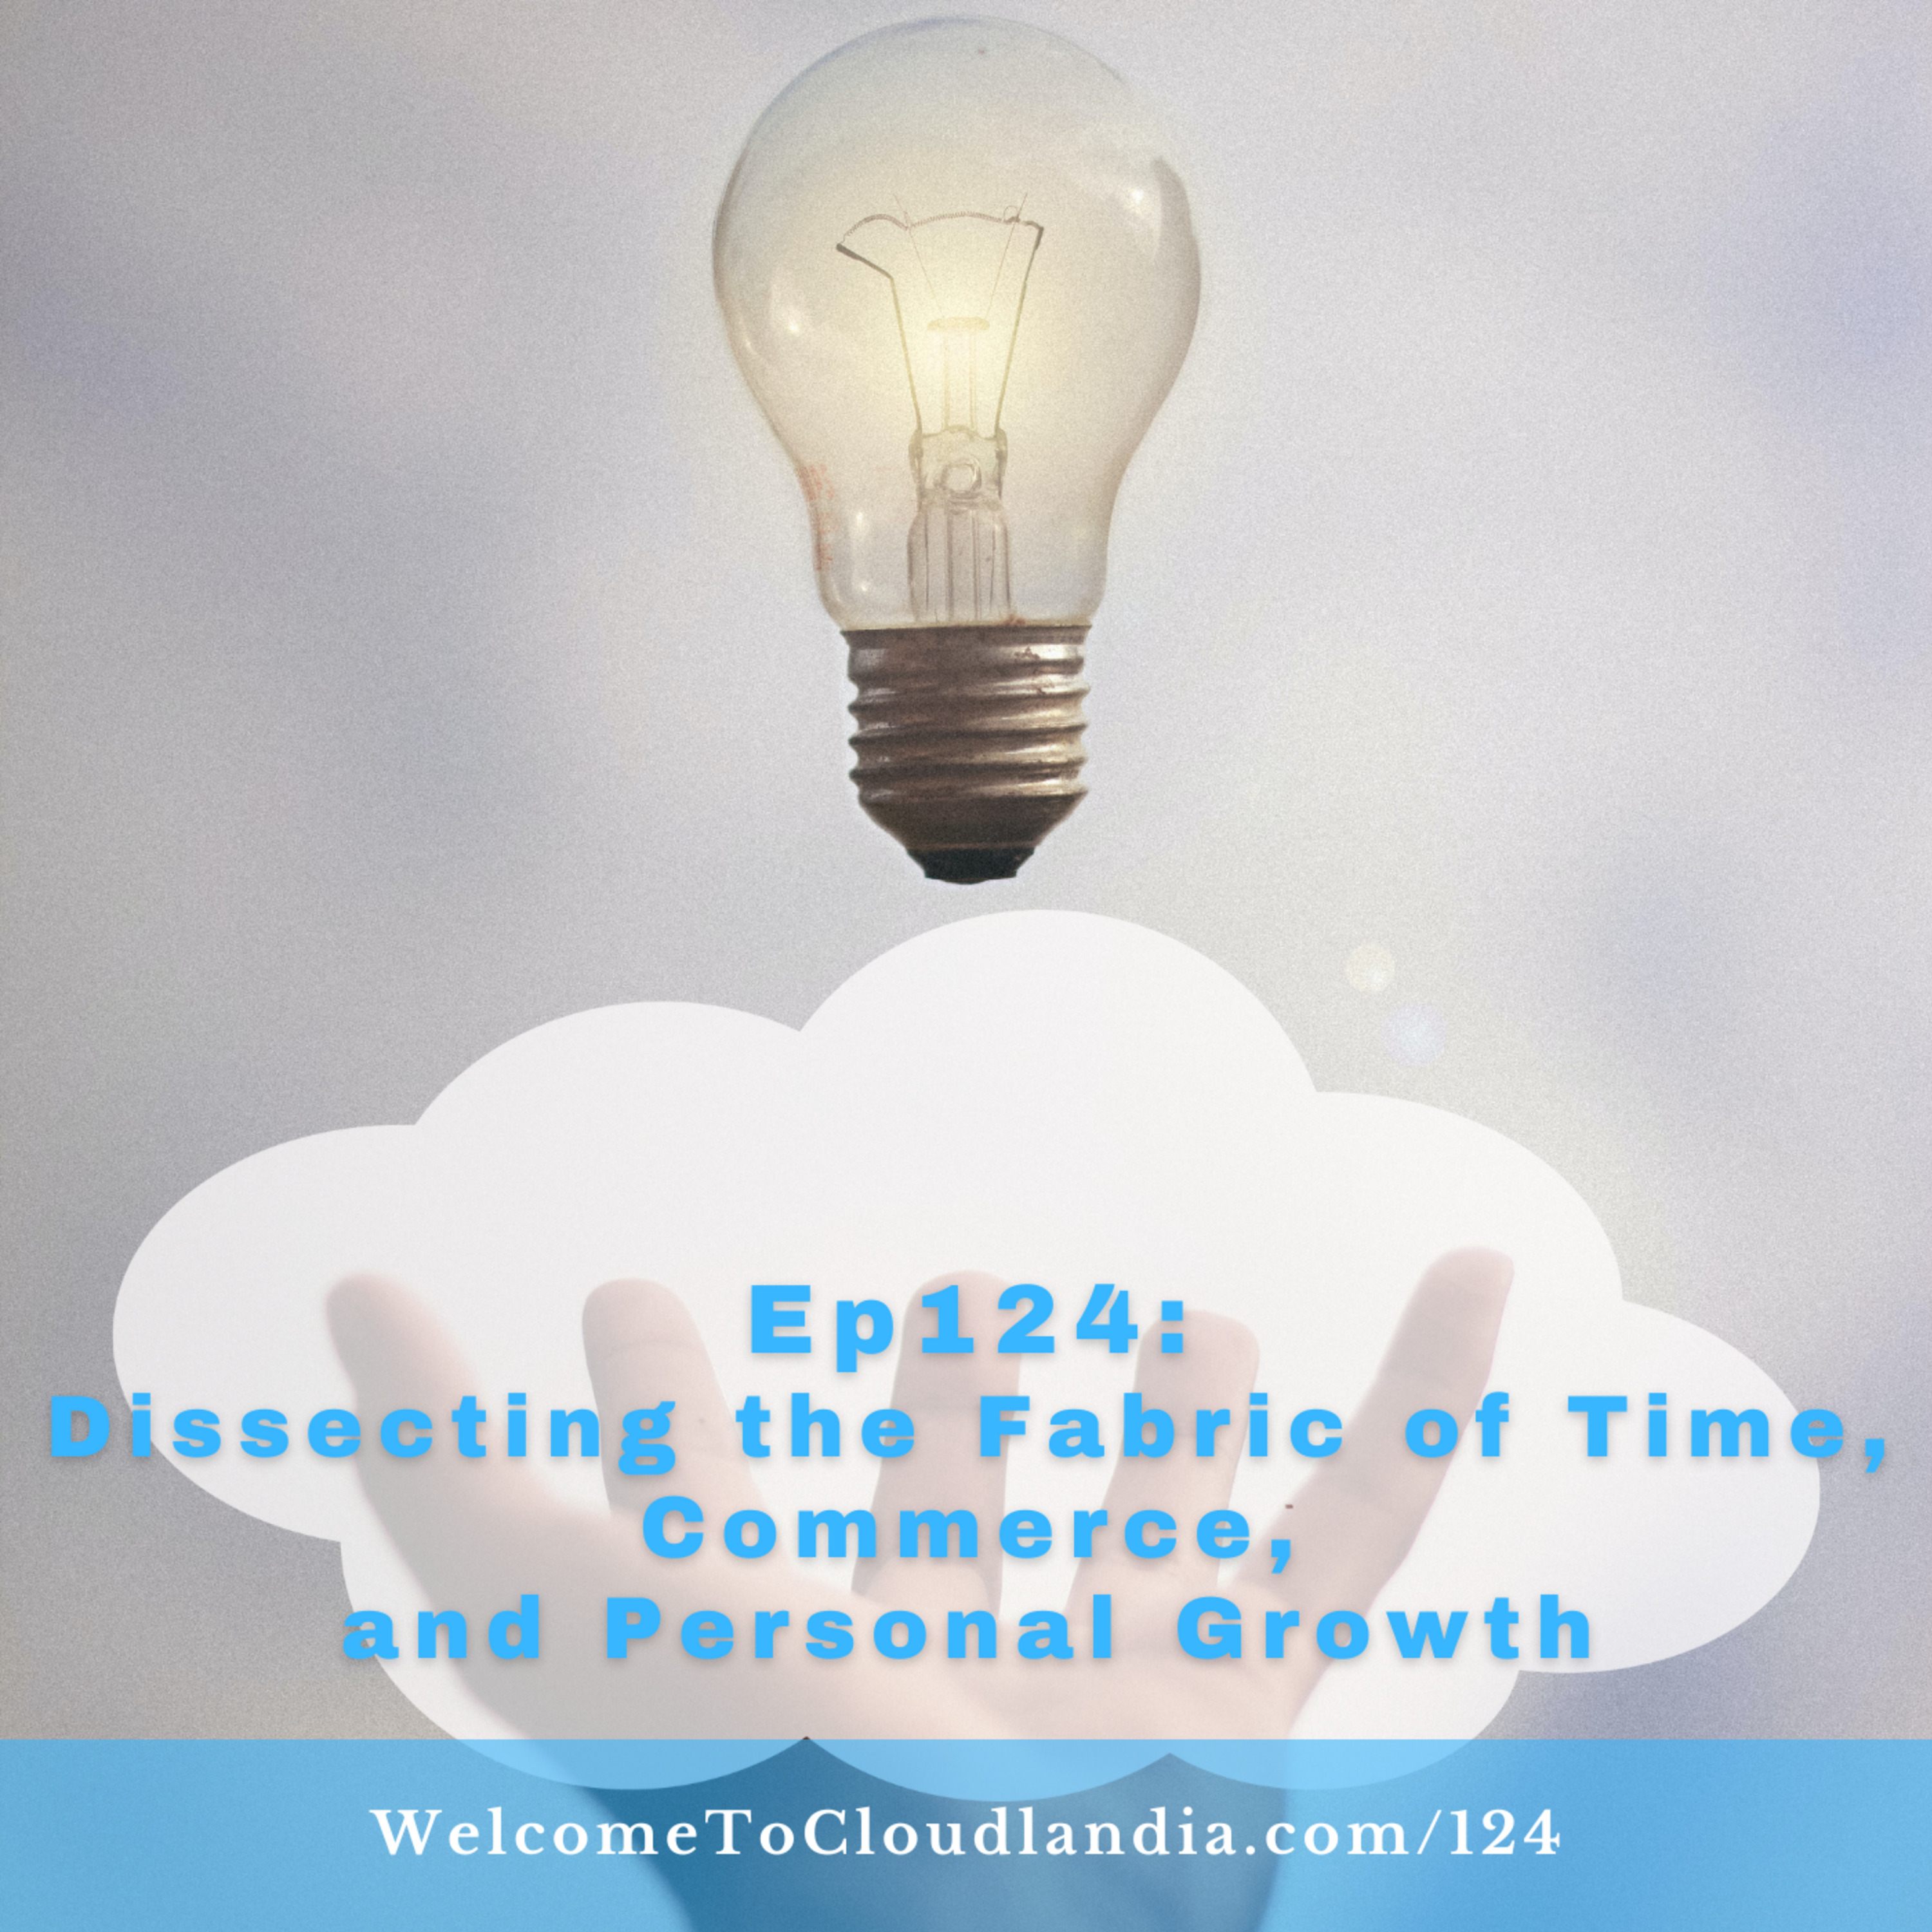 Ep124: Dissecting the Fabric of Time, Commerce, and Personal Growth